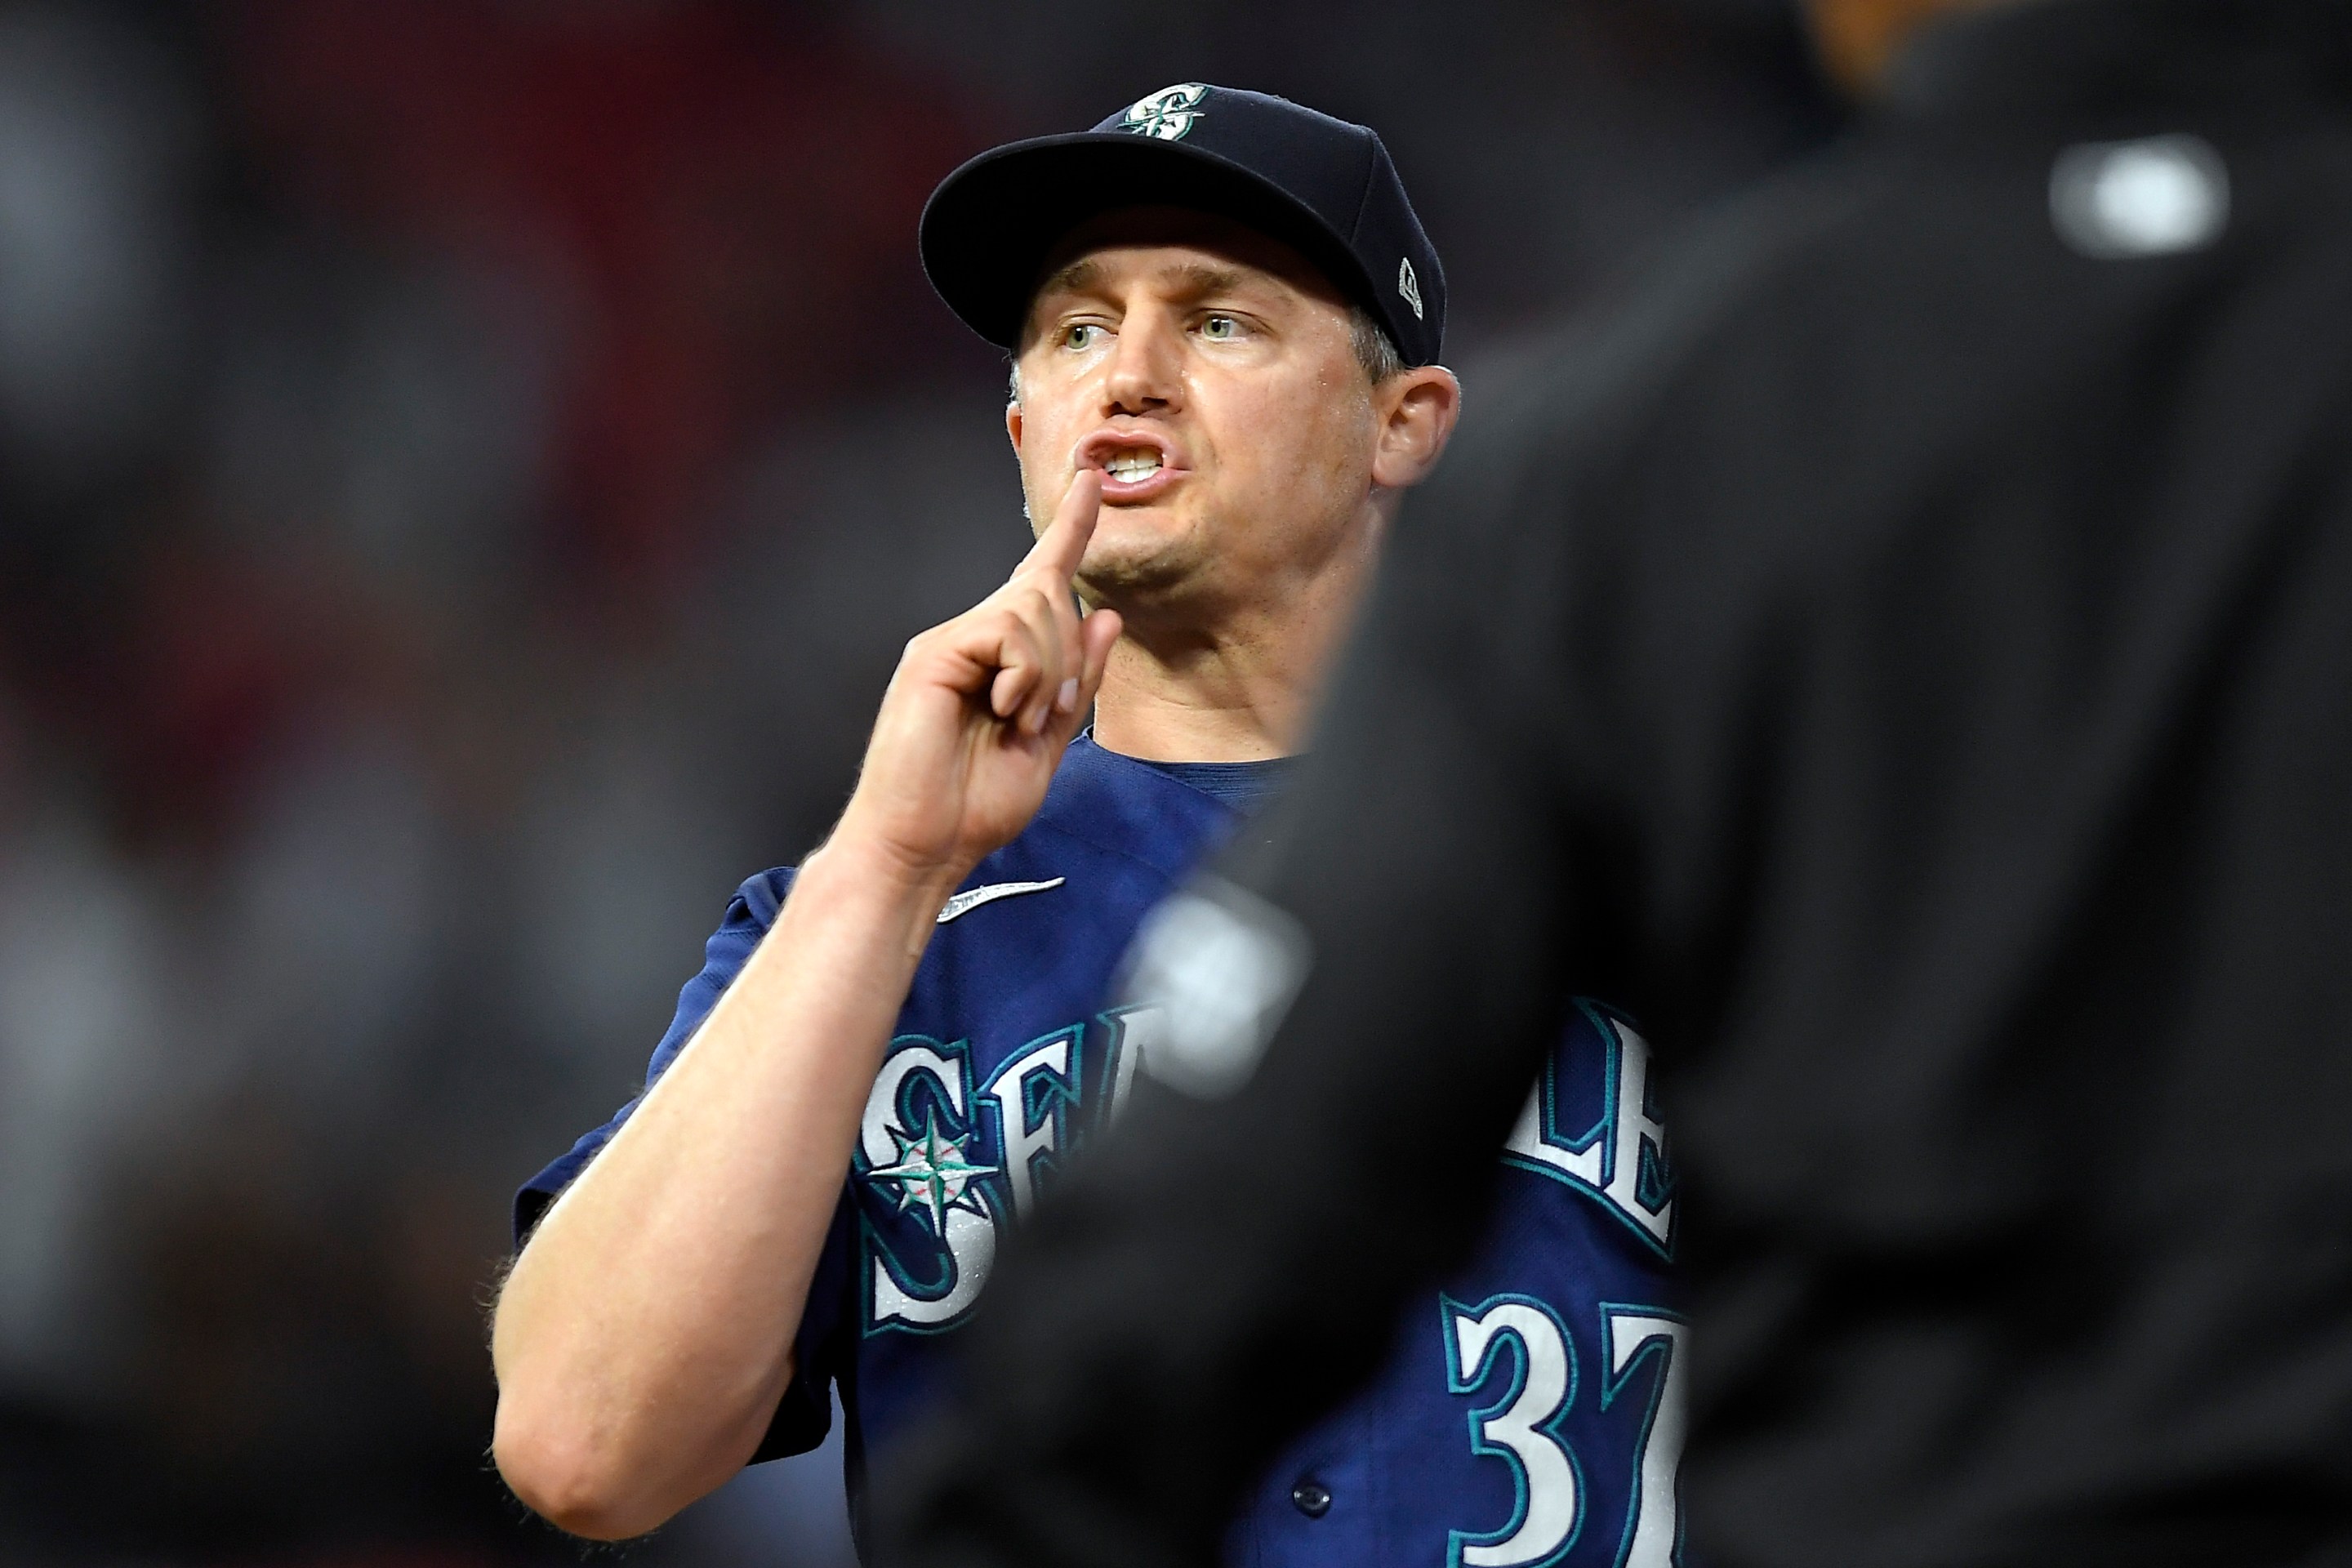 Seattle Mariners reliever Paul Sewald hushes the crowd in Anaheim down the stretch of his team's failed 2021 playoff run.